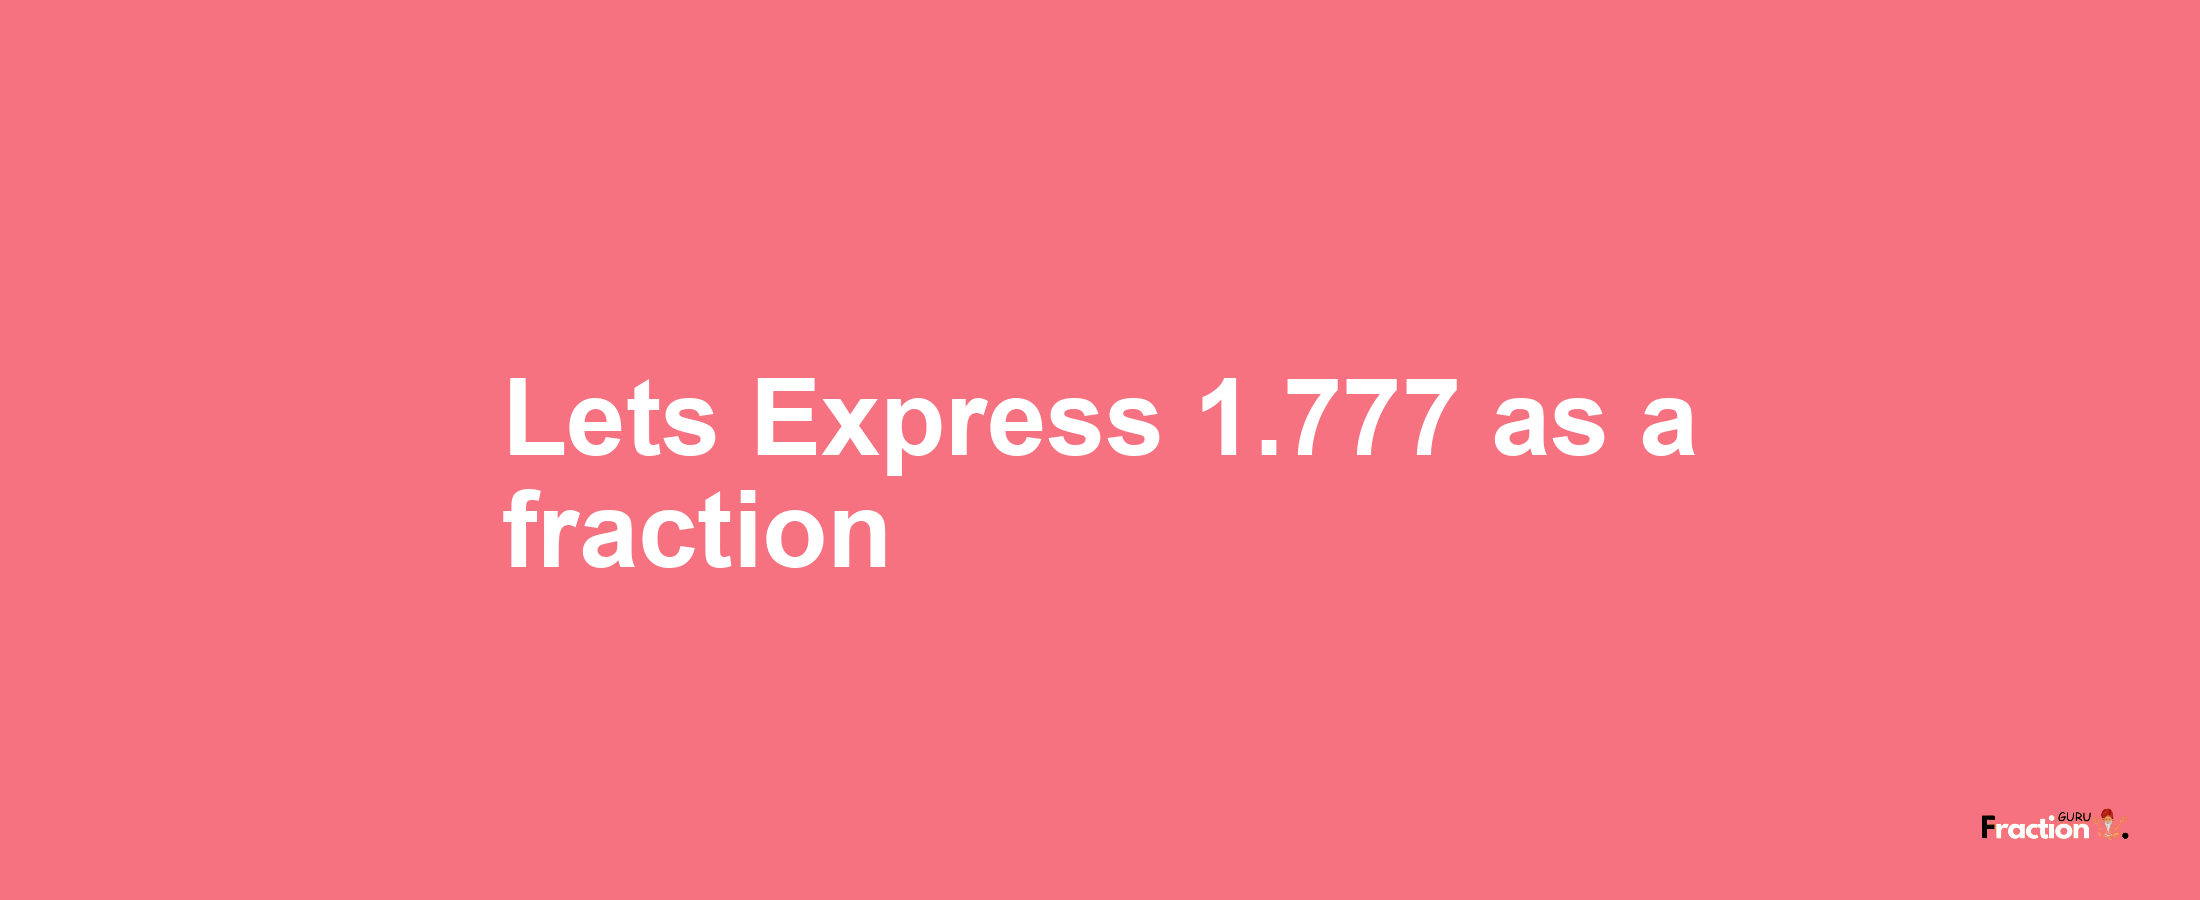 Lets Express 1.777 as afraction